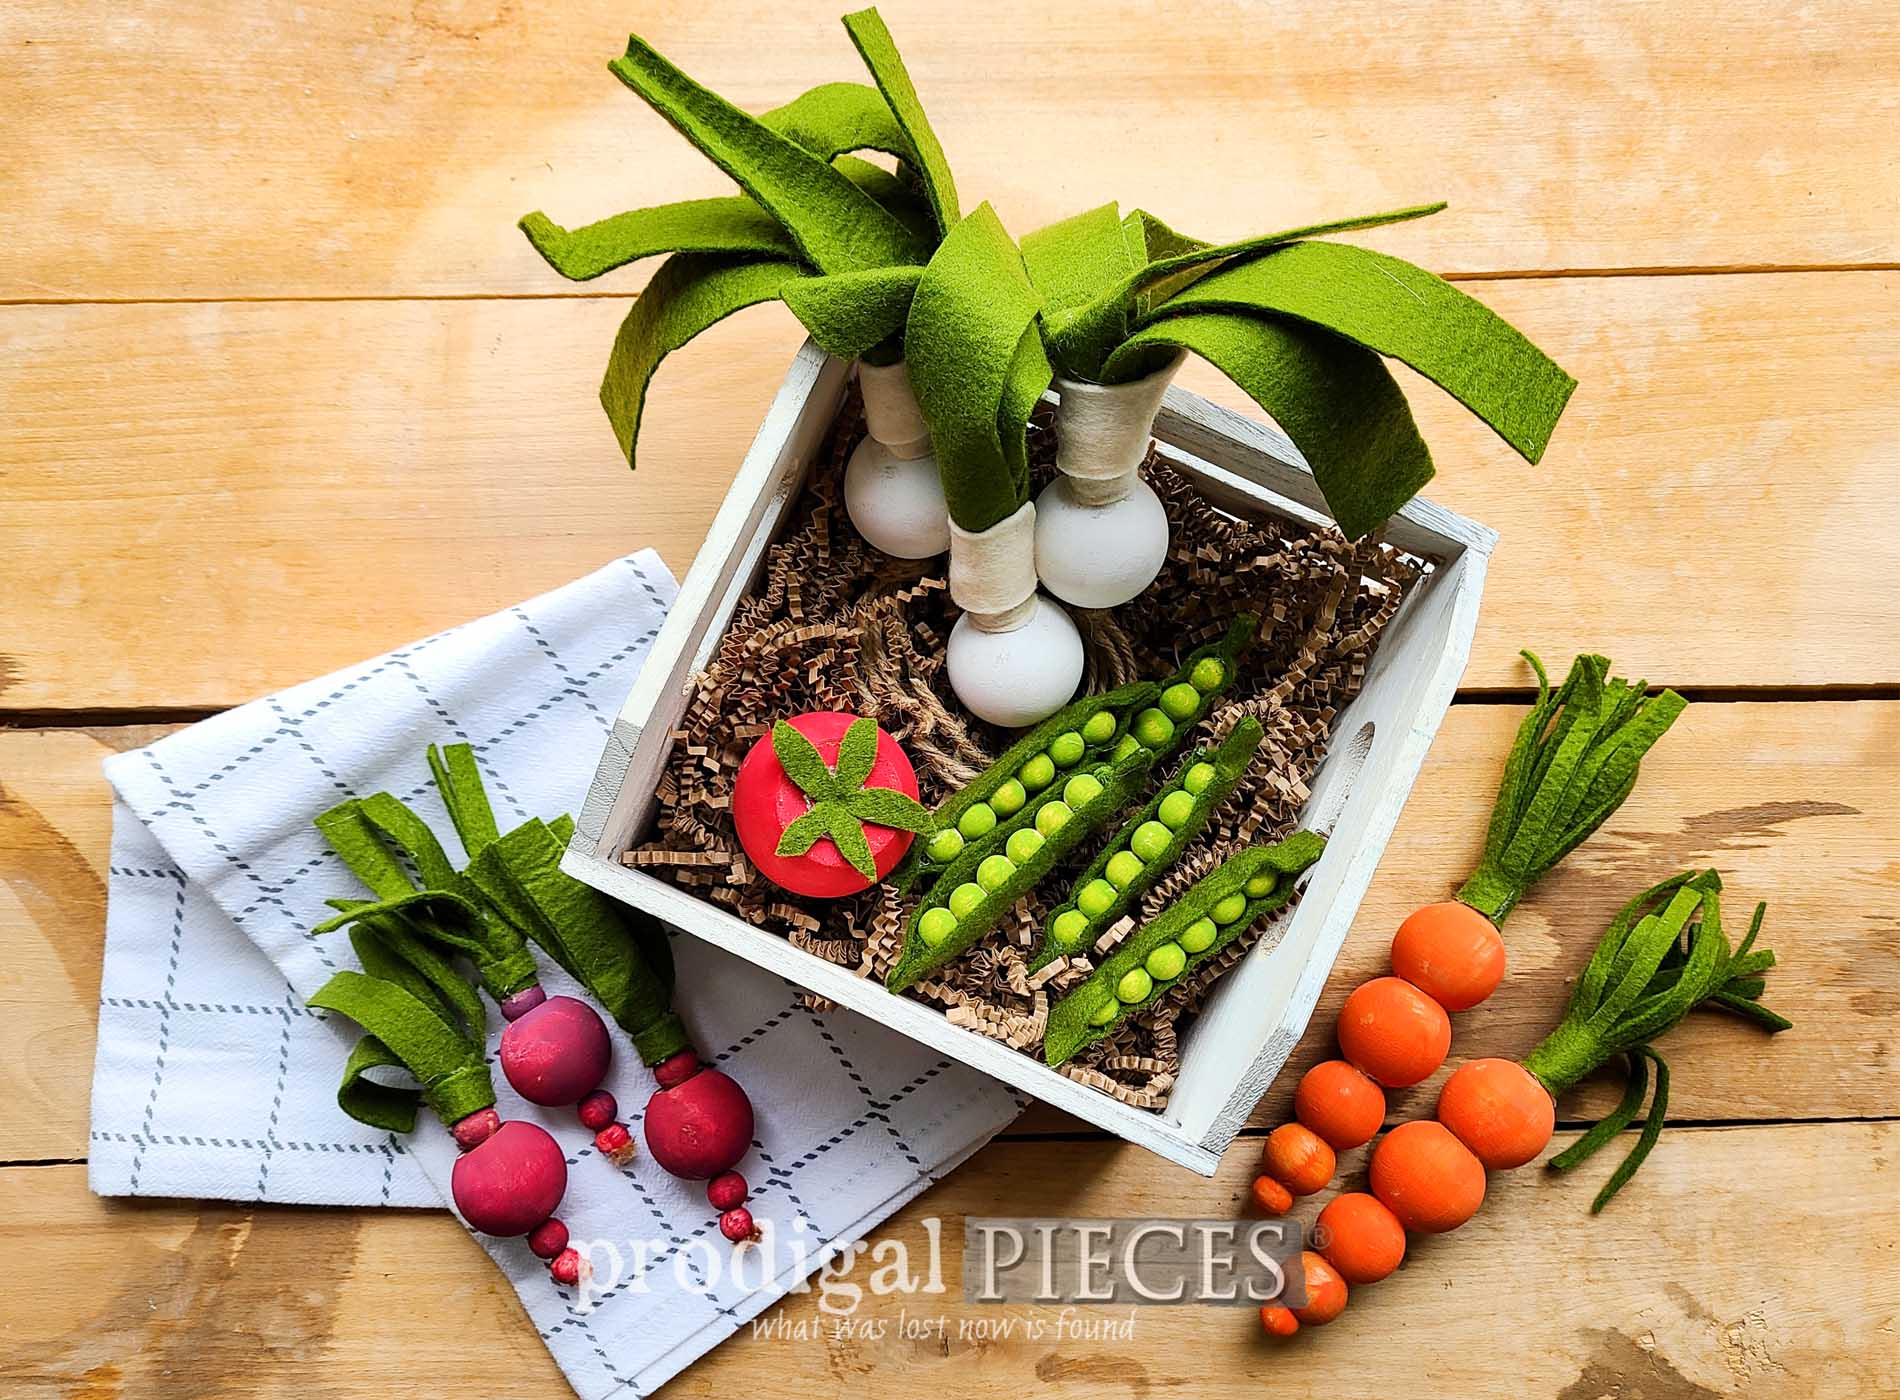 Featured Wooden Bead Vegetables DIY Tutorial by Larissa of Prodigal Pieces | prodgigalpieces.com #prodigalpieces